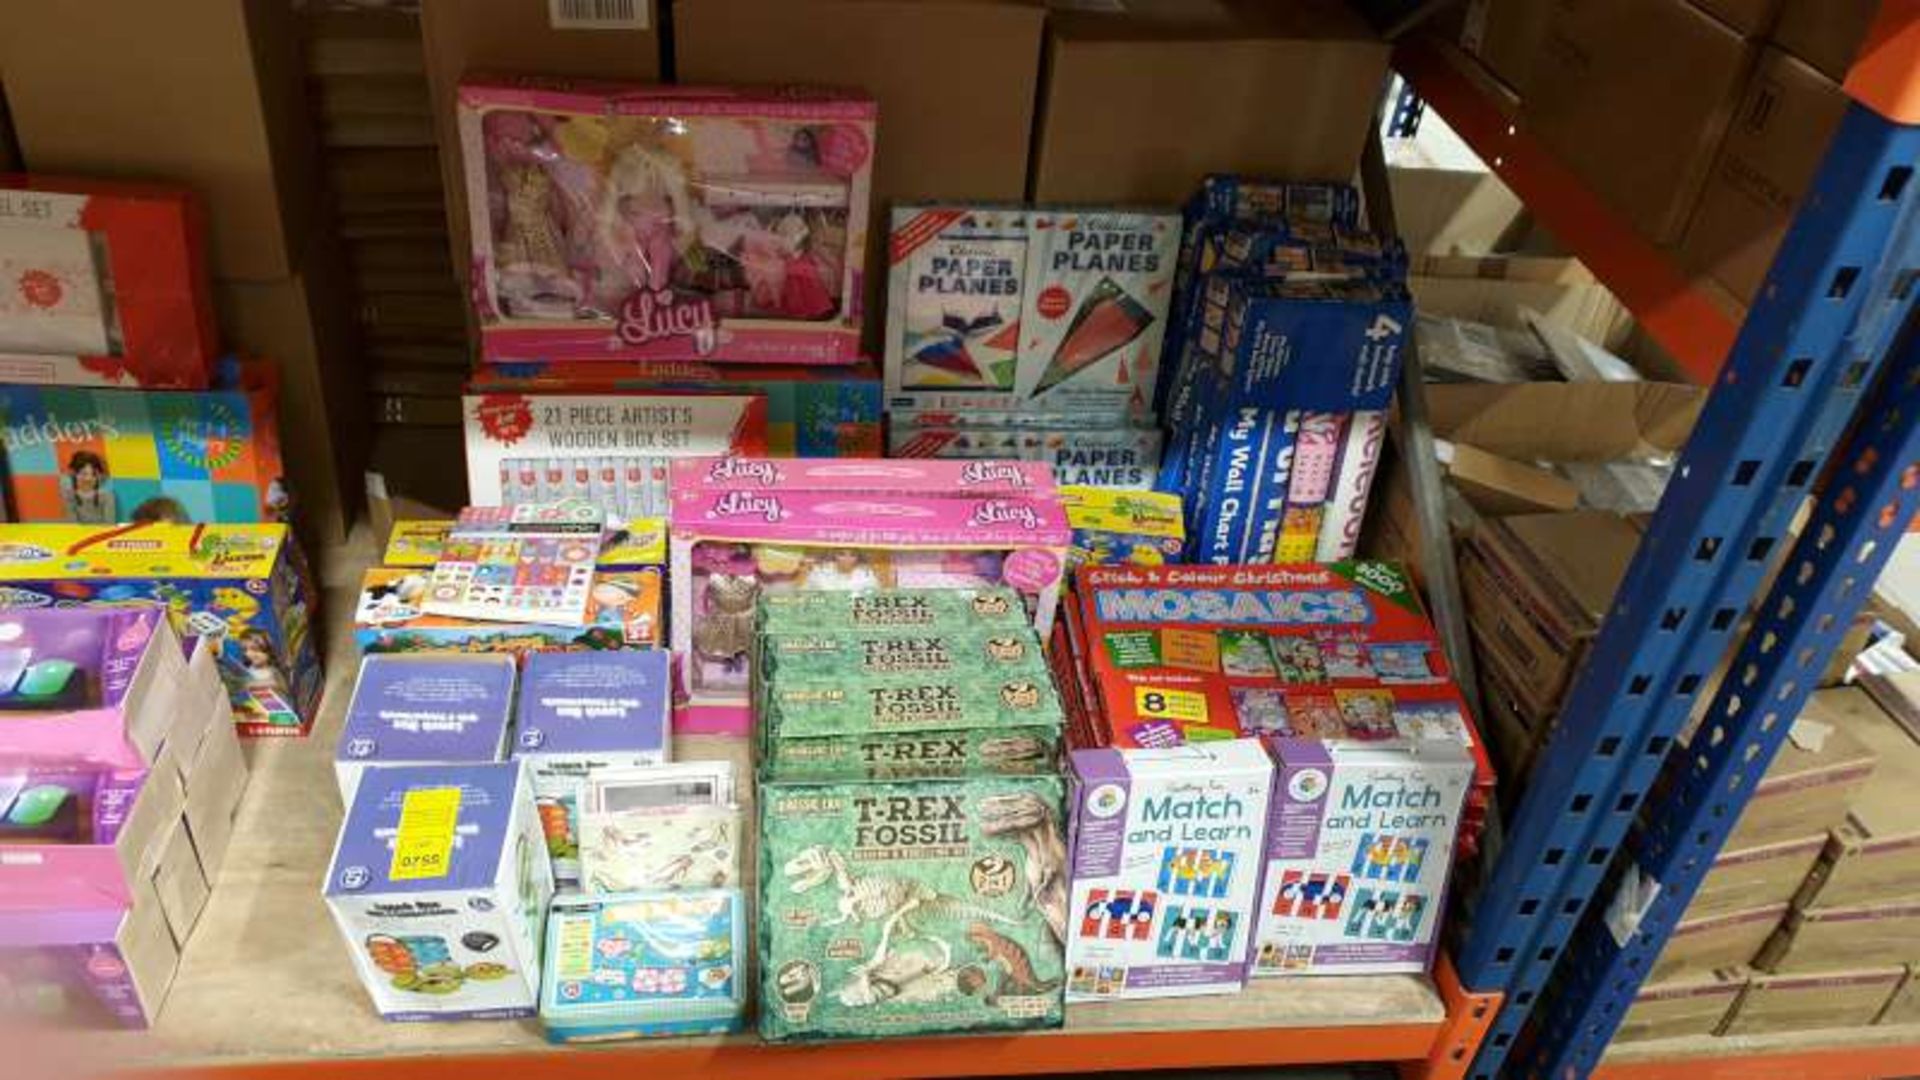 MIXED LOT CONTAINING LUCY DOLL SETS, 21 PIECE ARTISTS WOODEN BOX SETS, LUNCH BOXES, STICK AND COLOUR